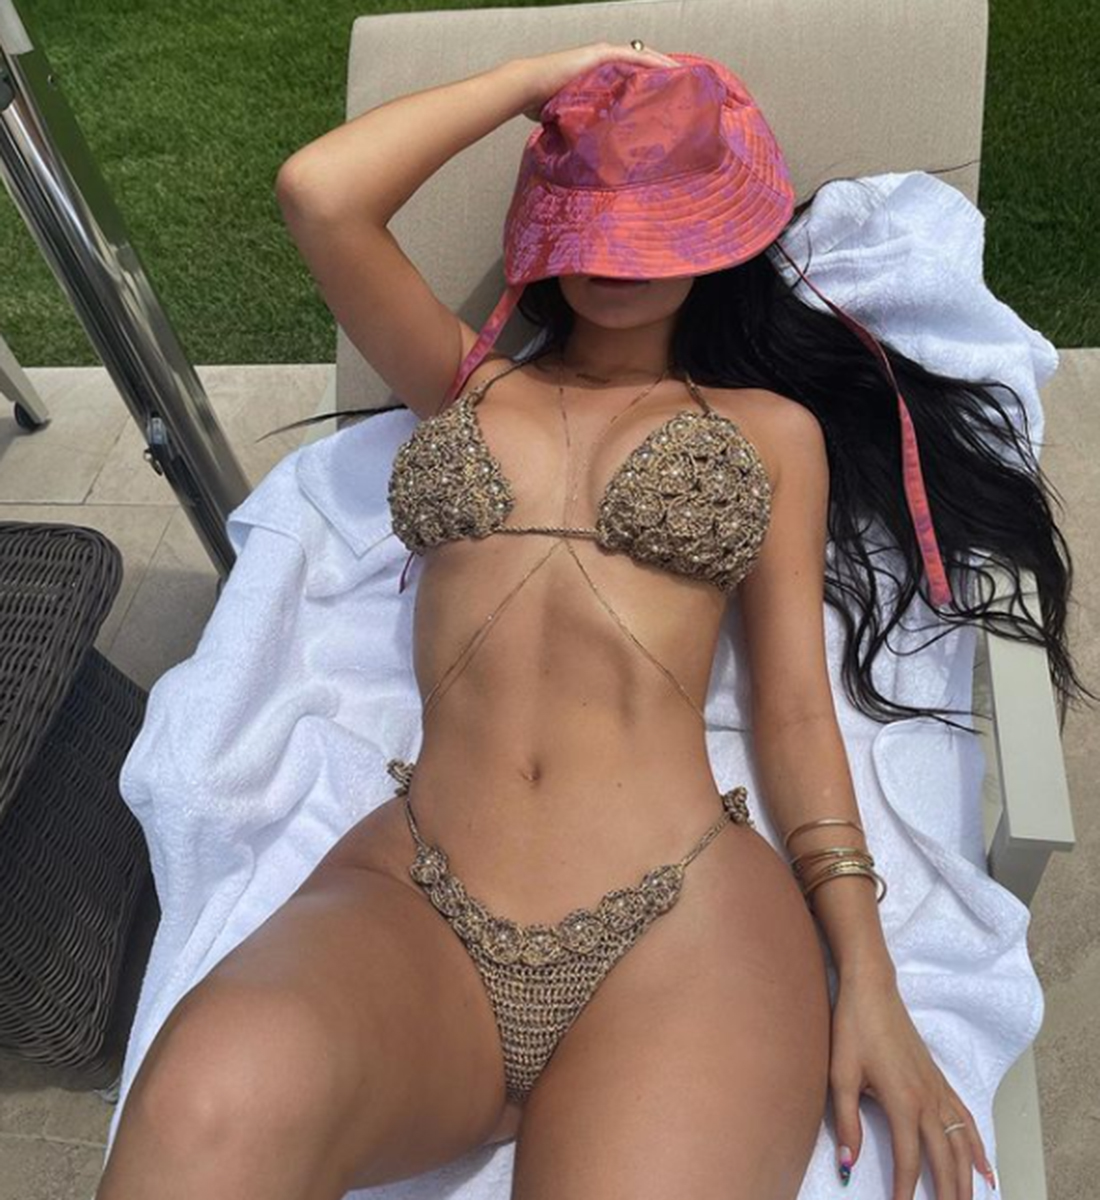 Kylie πη struck again with outrageously revealing photos! 35